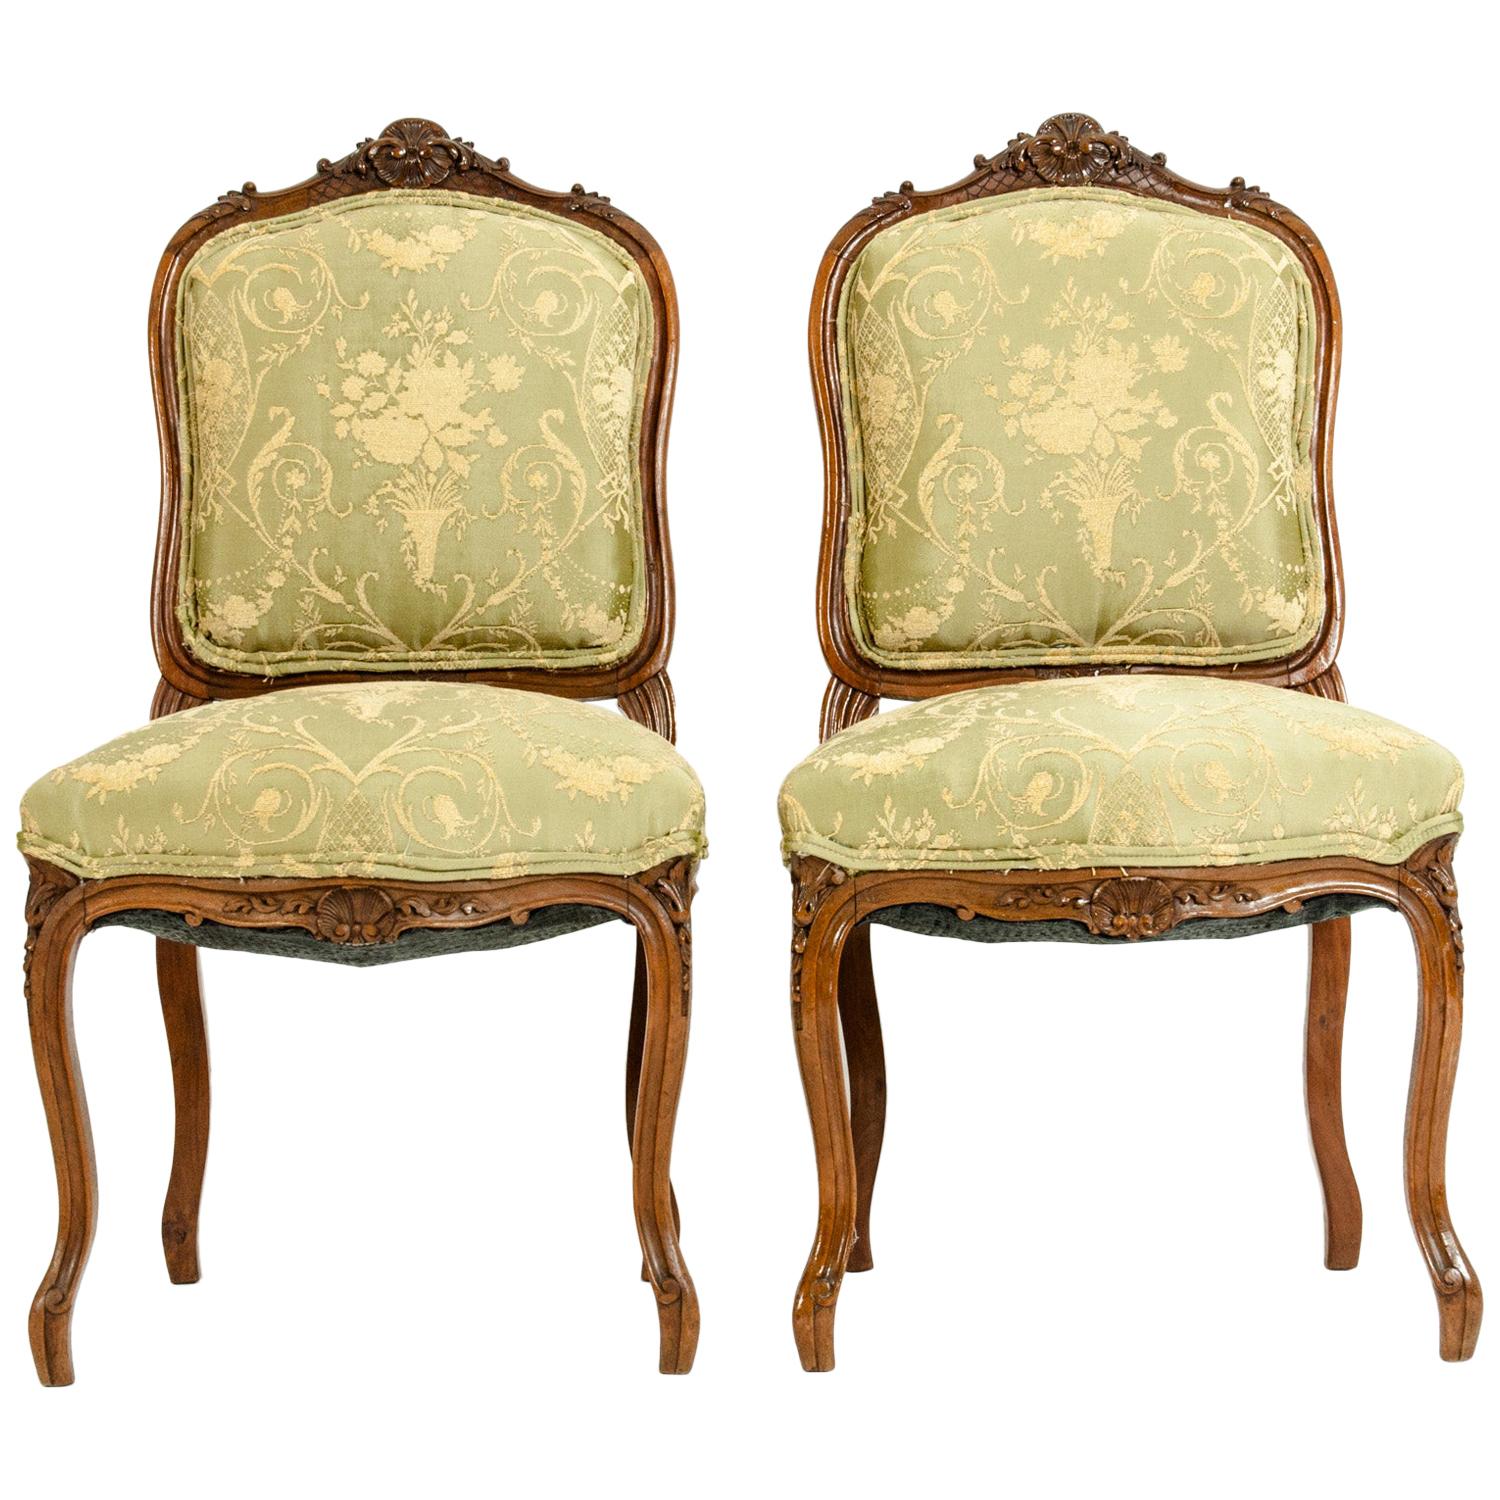 Mid-19th Century Mahogany Wood Frame Side Chairs